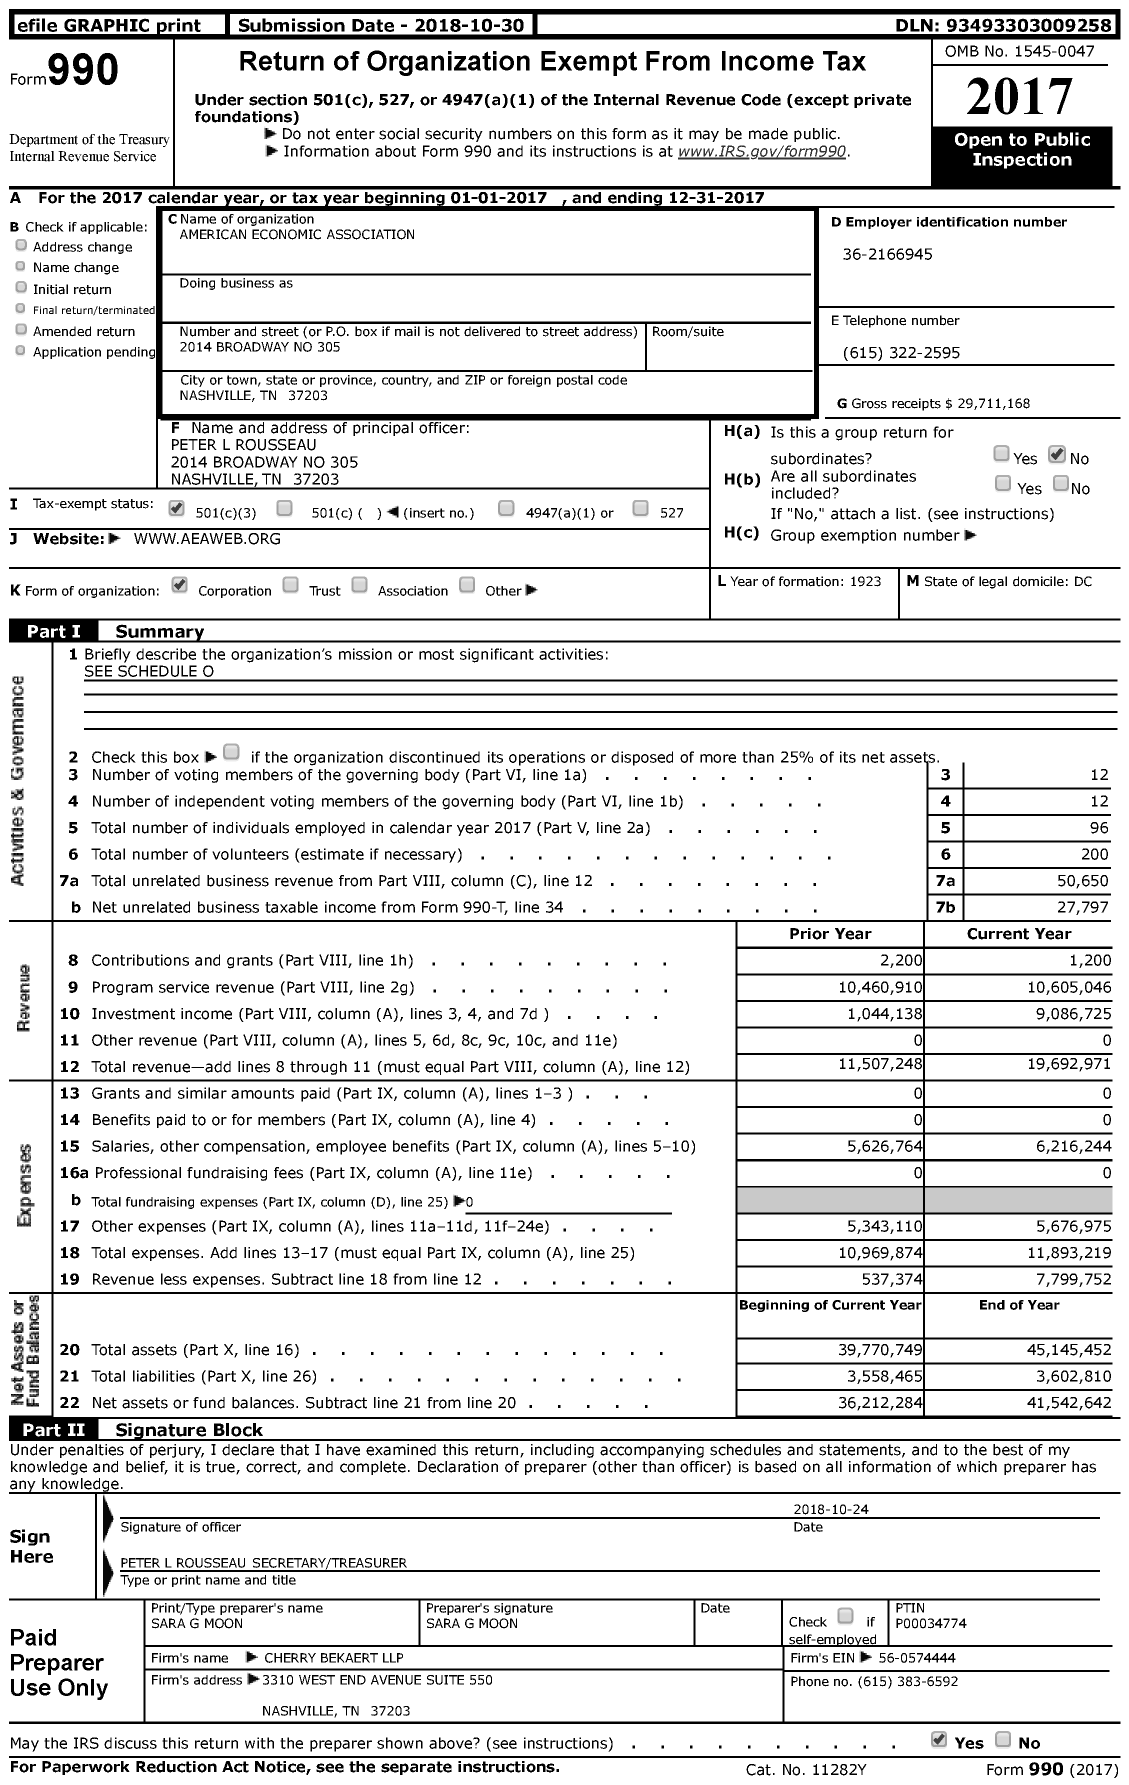 Image of first page of 2017 Form 990 for American Economic Association (AEA)